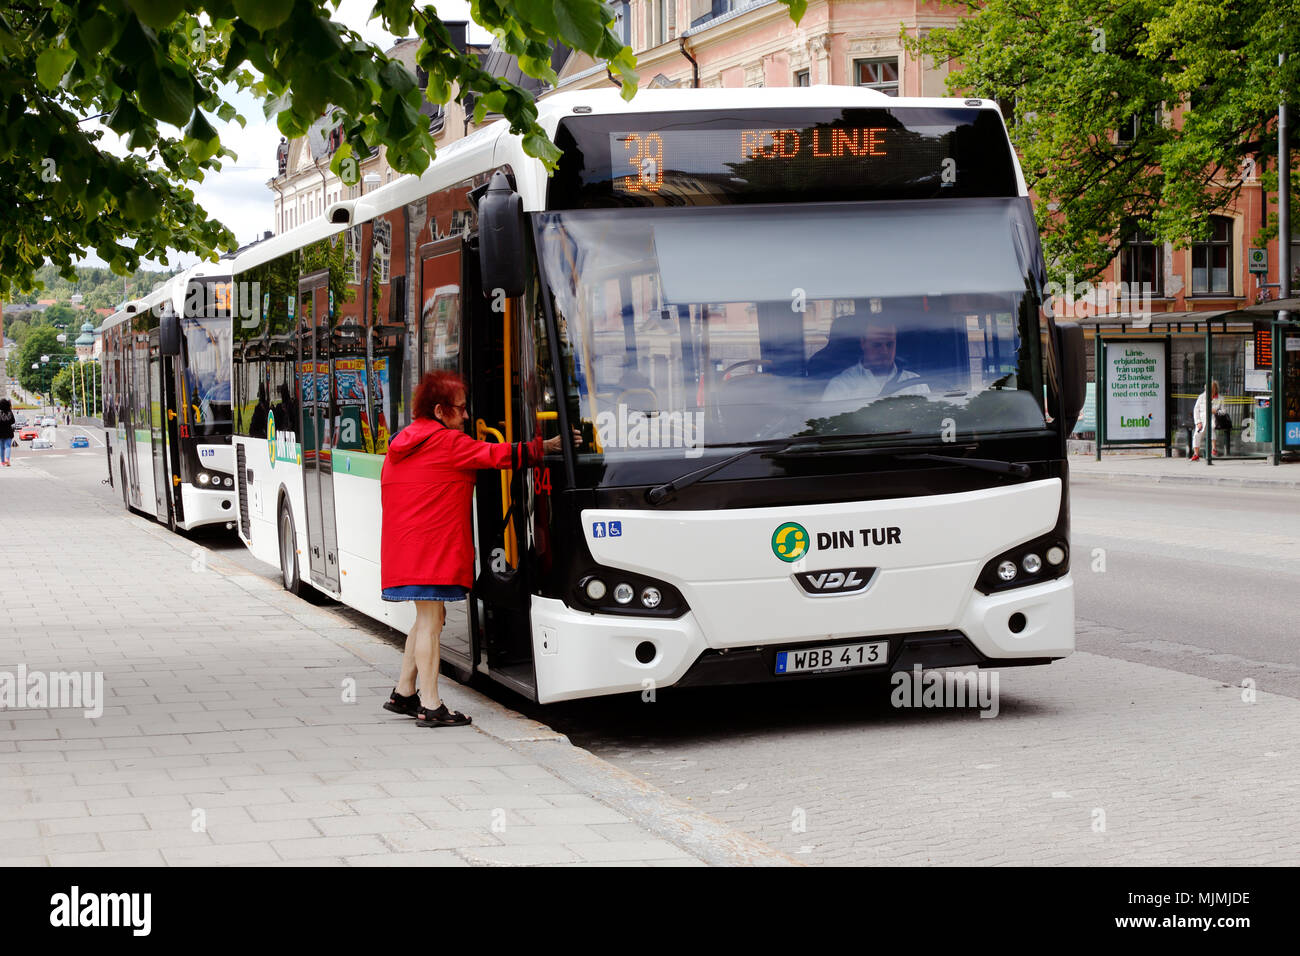 Harnosand, Sweden - July 5, 2017: An elderly woman with red clothes walks aboard the white city bus in traffic on line 39 for Min Tur at the bus stop  Stock Photo